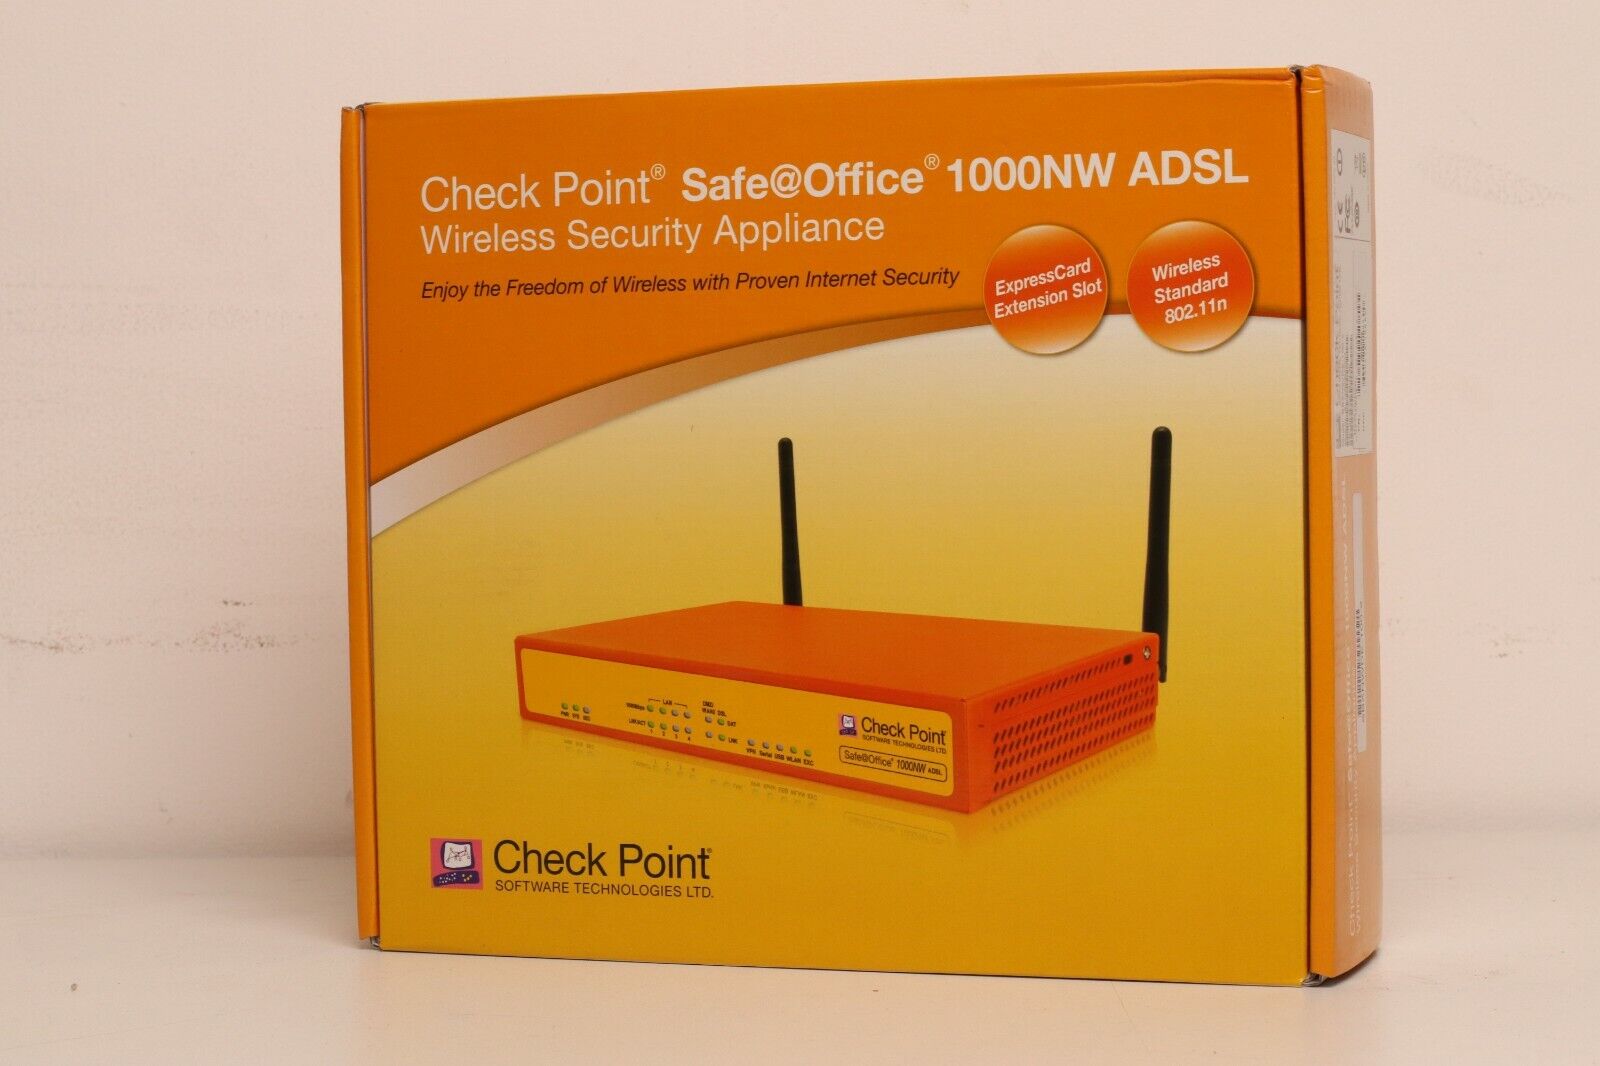 Check Point Firewall SBXNWDE-100-2 Wireless Gateway Router 1000NW ADSL